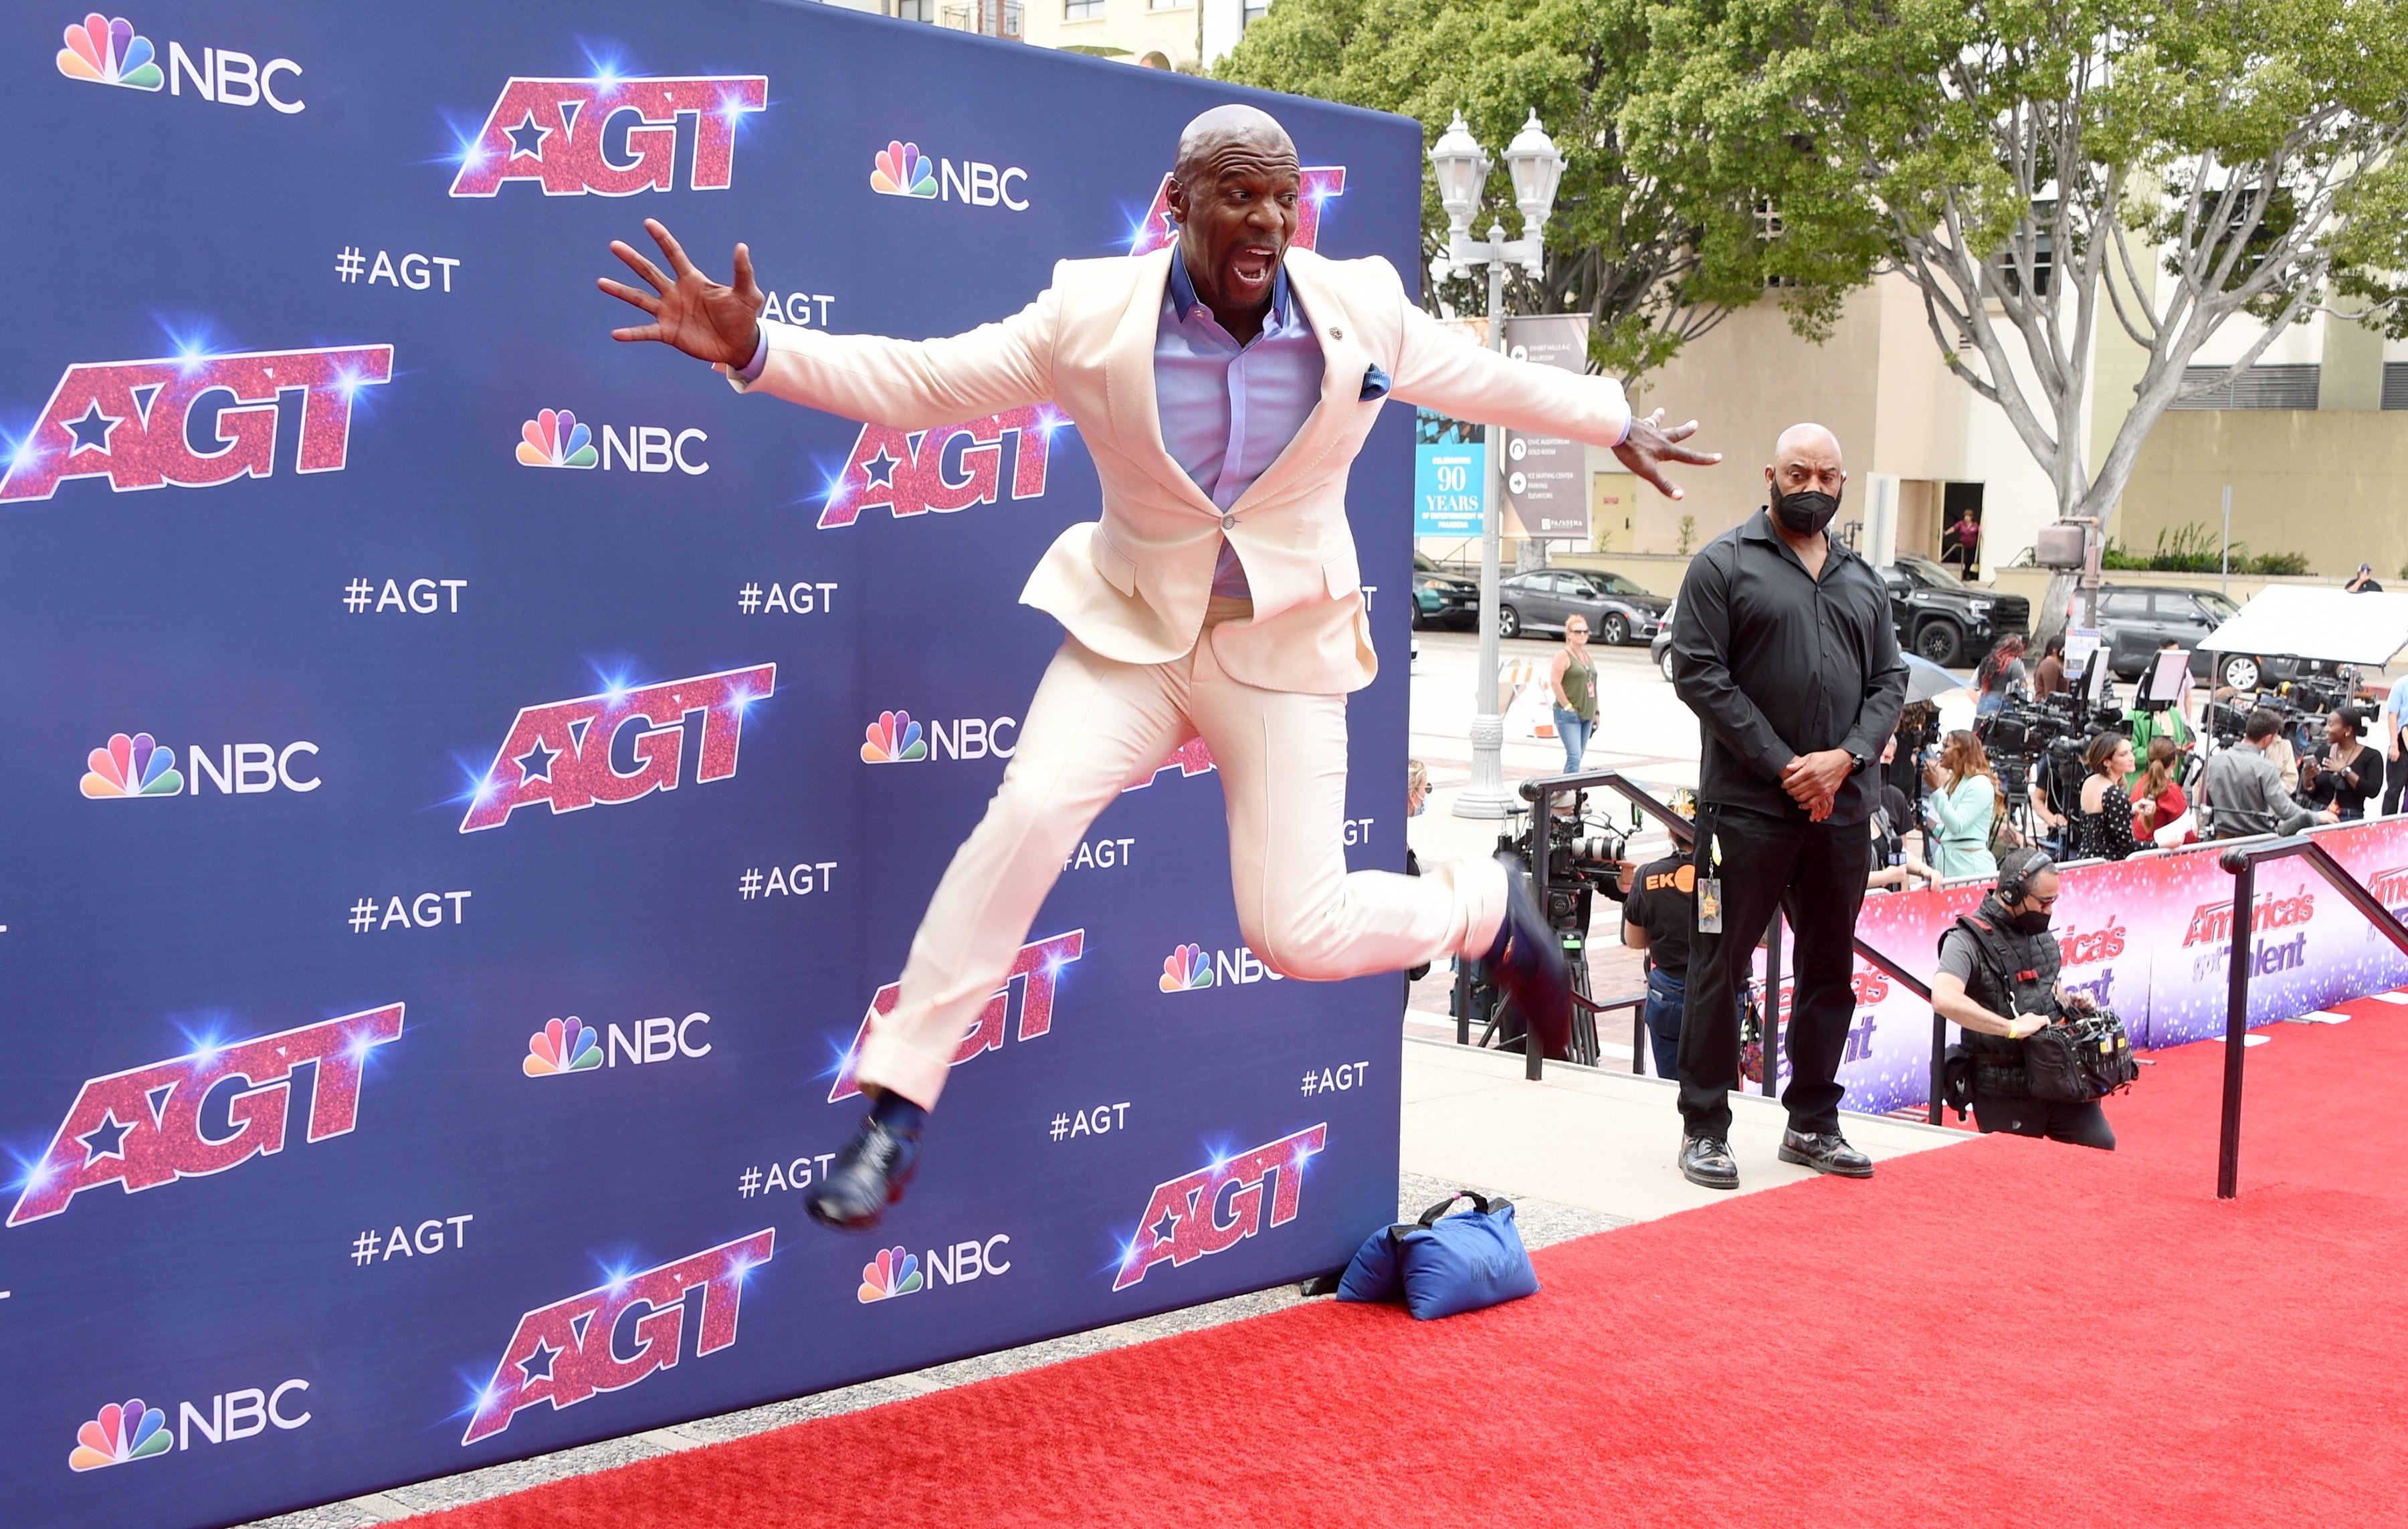 'America's Got Talent' host Terry Crews jumping in the air at the season 17 kick-off red carpet event